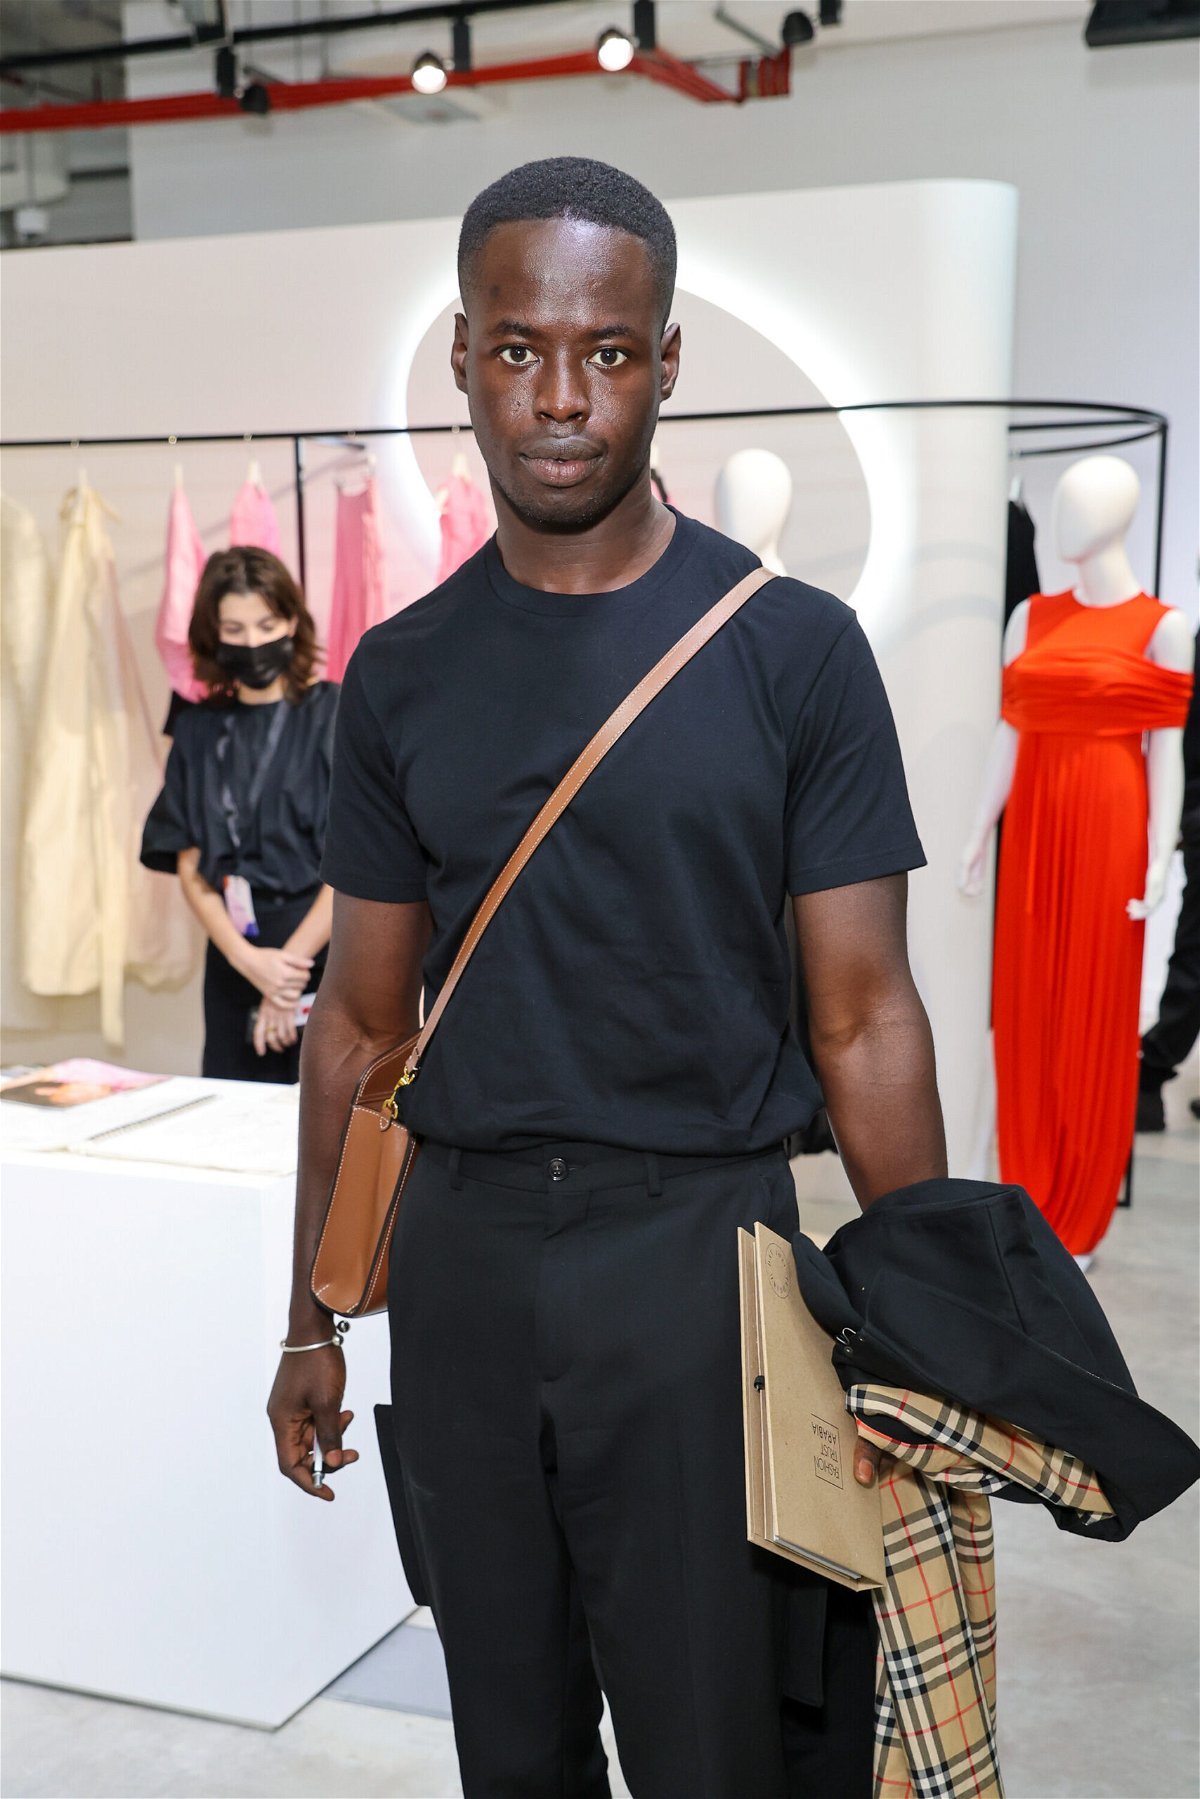 Virgil Abloh's Final Louis Vuitton Collection Will Be Presented in